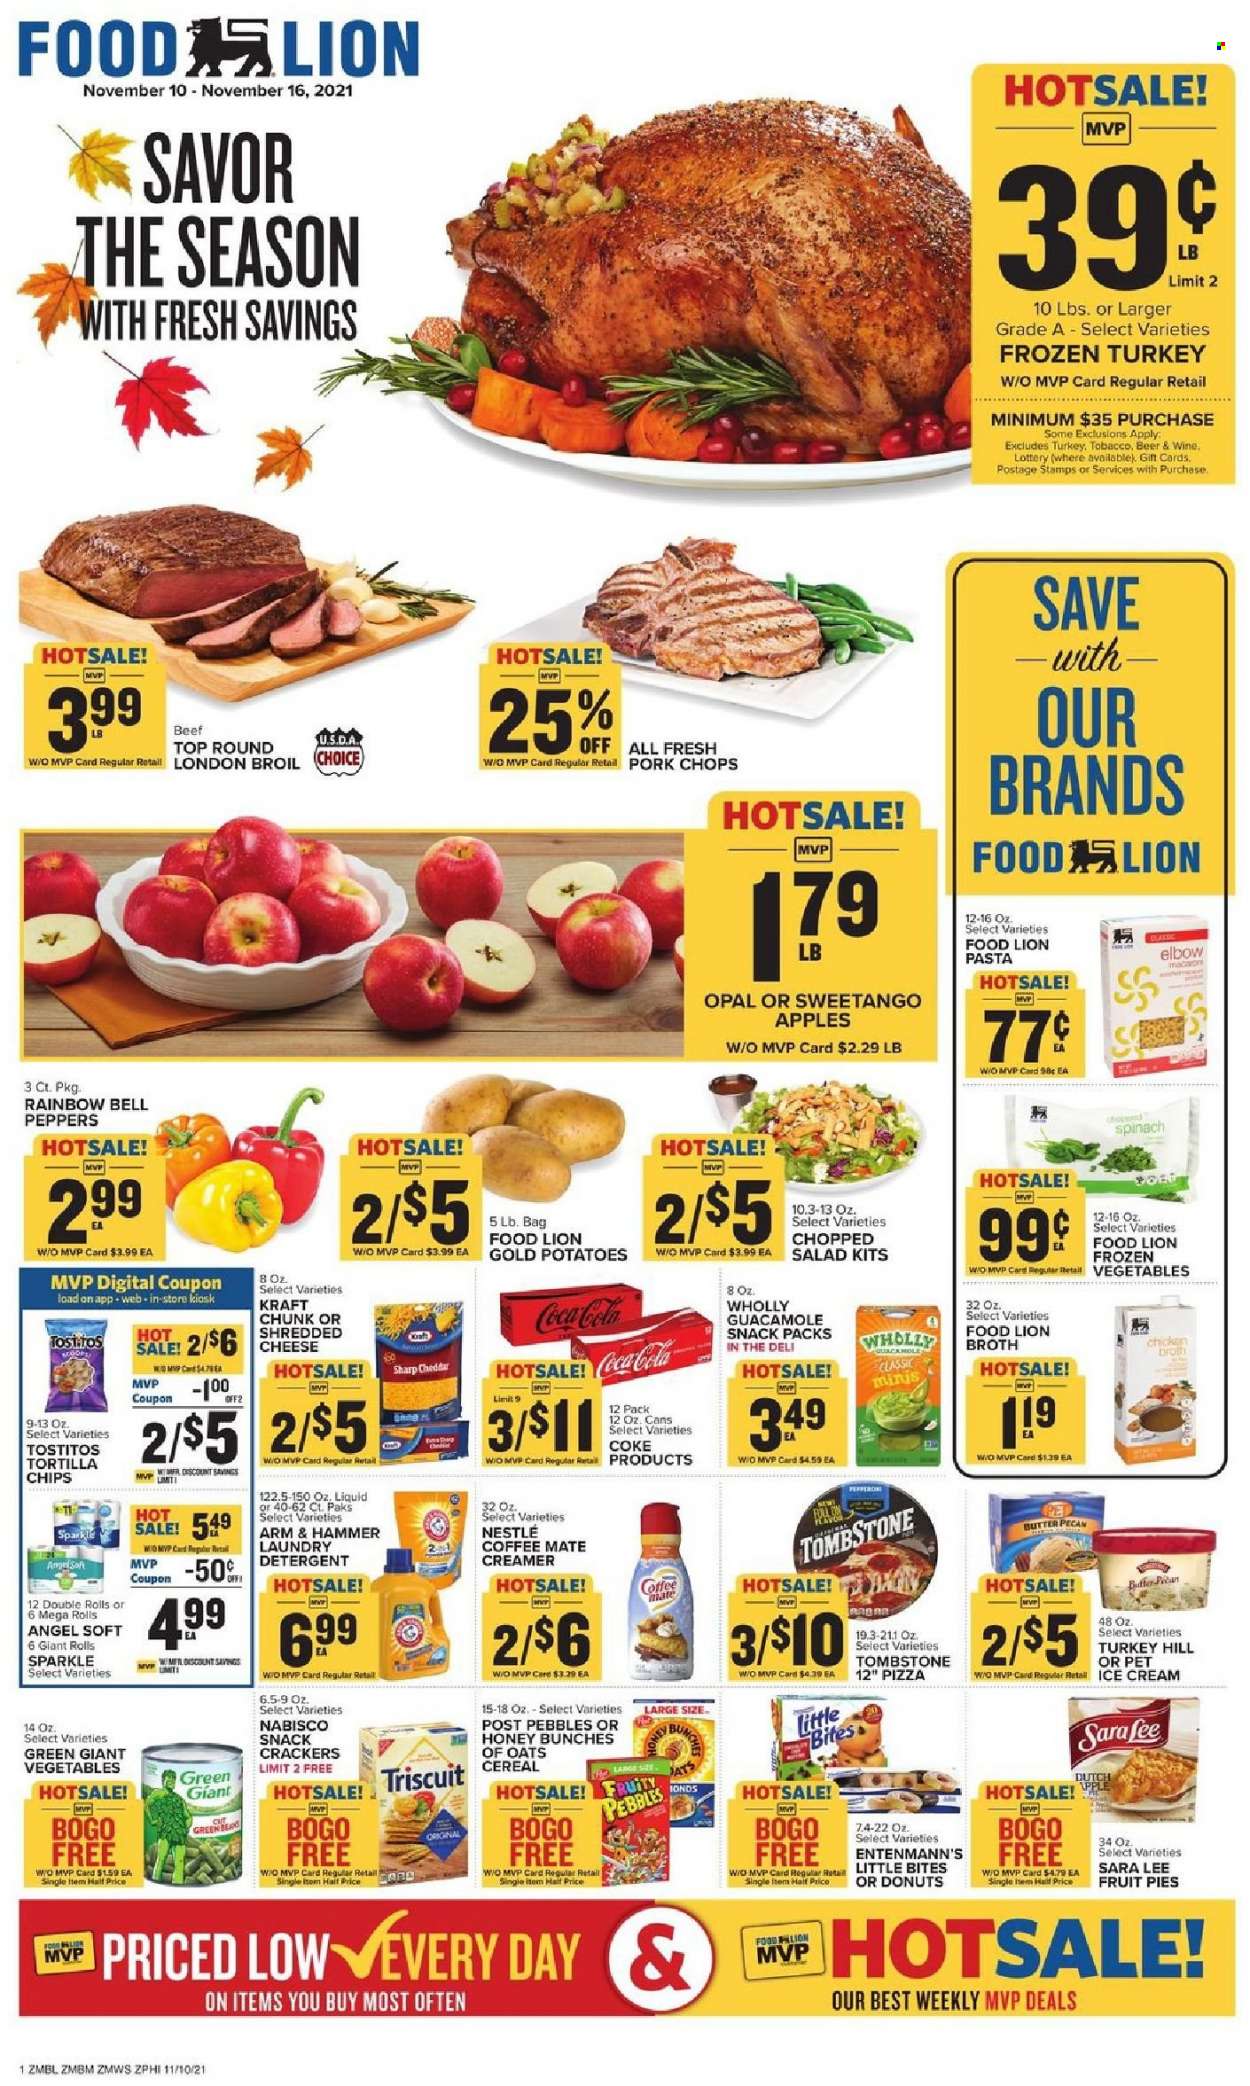 thumbnail - Food Lion Flyer - 11/10/2021 - 11/16/2021 - Sales products - Sara Lee, donut, Entenmann's, bell peppers, potatoes, salad, peppers, apples, pizza, pasta, Kraft®, guacamole, Coffee-Mate, butter, creamer, ice cream, Nestlé, snack, crackers, Little Bites, tortilla chips, Tostitos, ARM & HAMMER, chicken broth, broth, cereals, Fruity Pebbles, Coca-Cola, wine, beer, whole turkey, pork chops, pork meat, detergent, laundry detergent. Page 1.